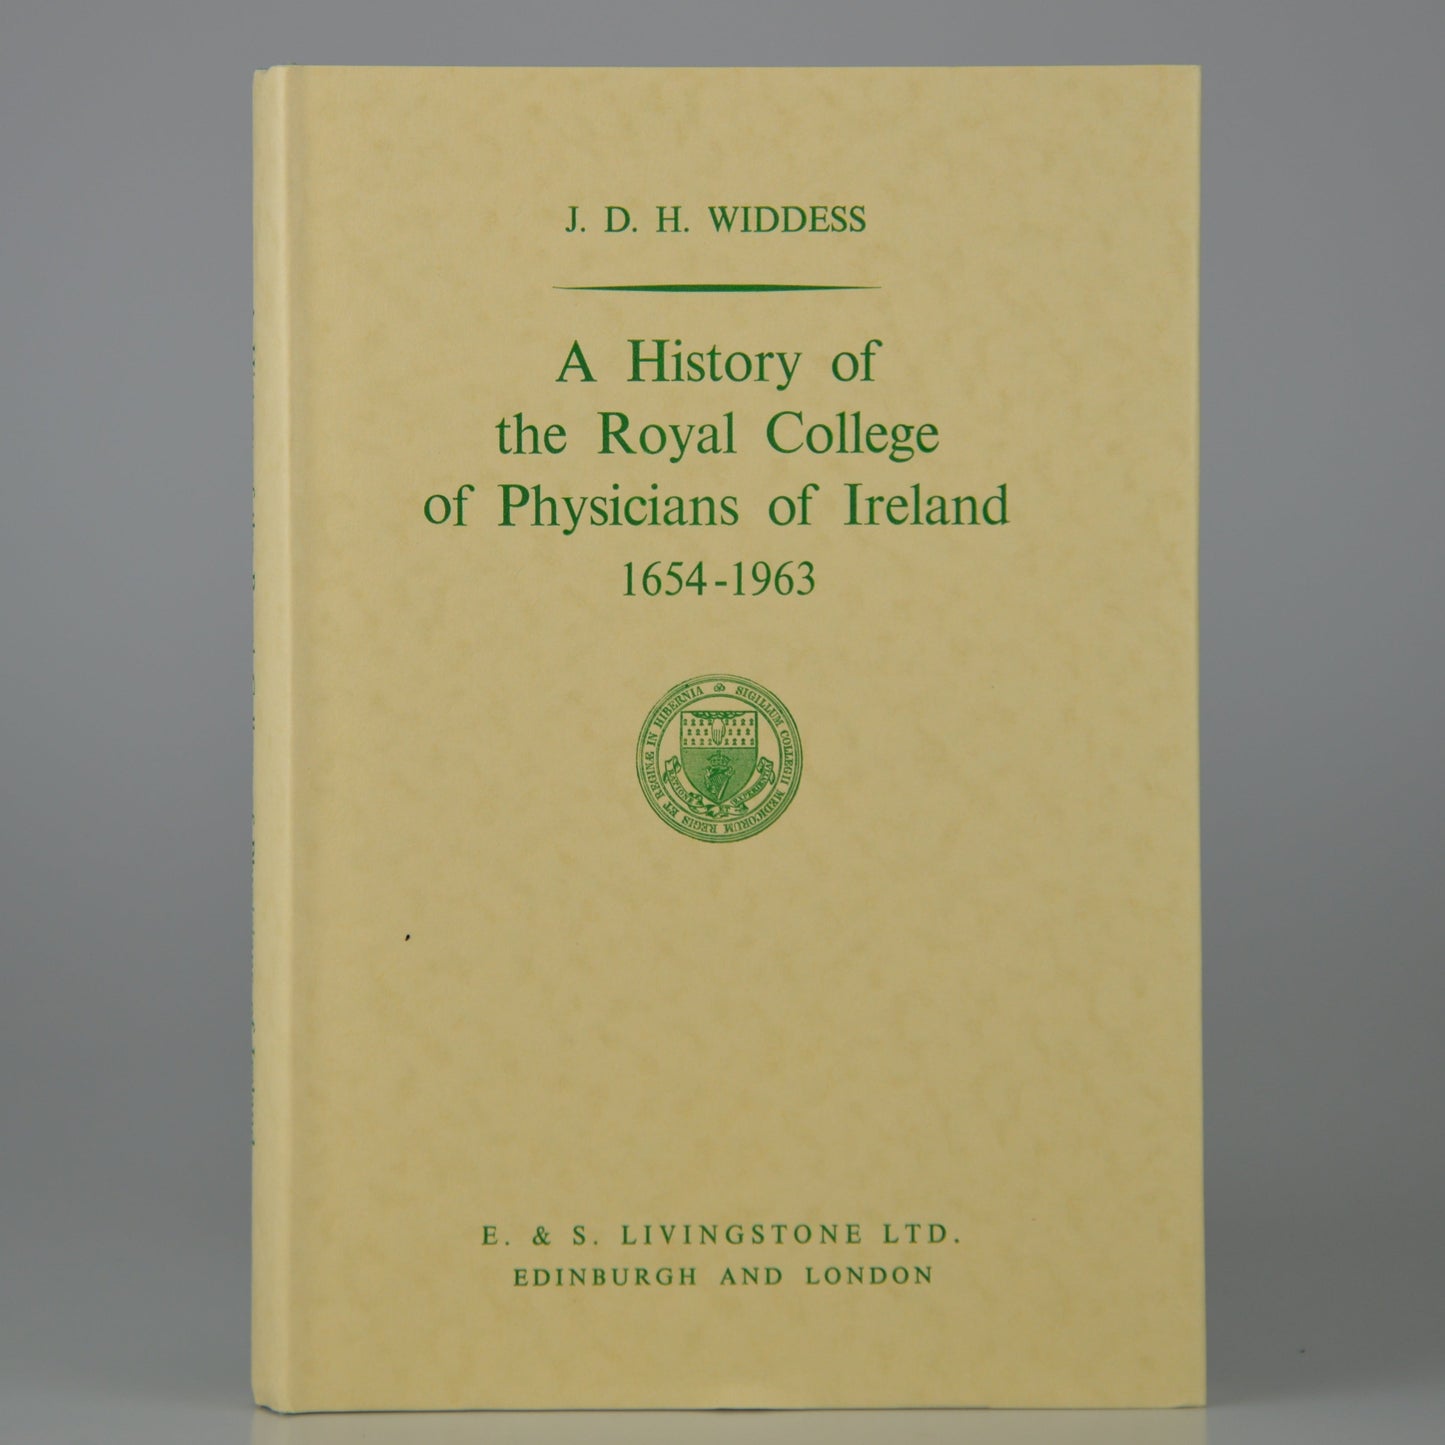 A History of the Royal College of Physicians of Ireland 1654 – 1963 by Prof J D H Widdess